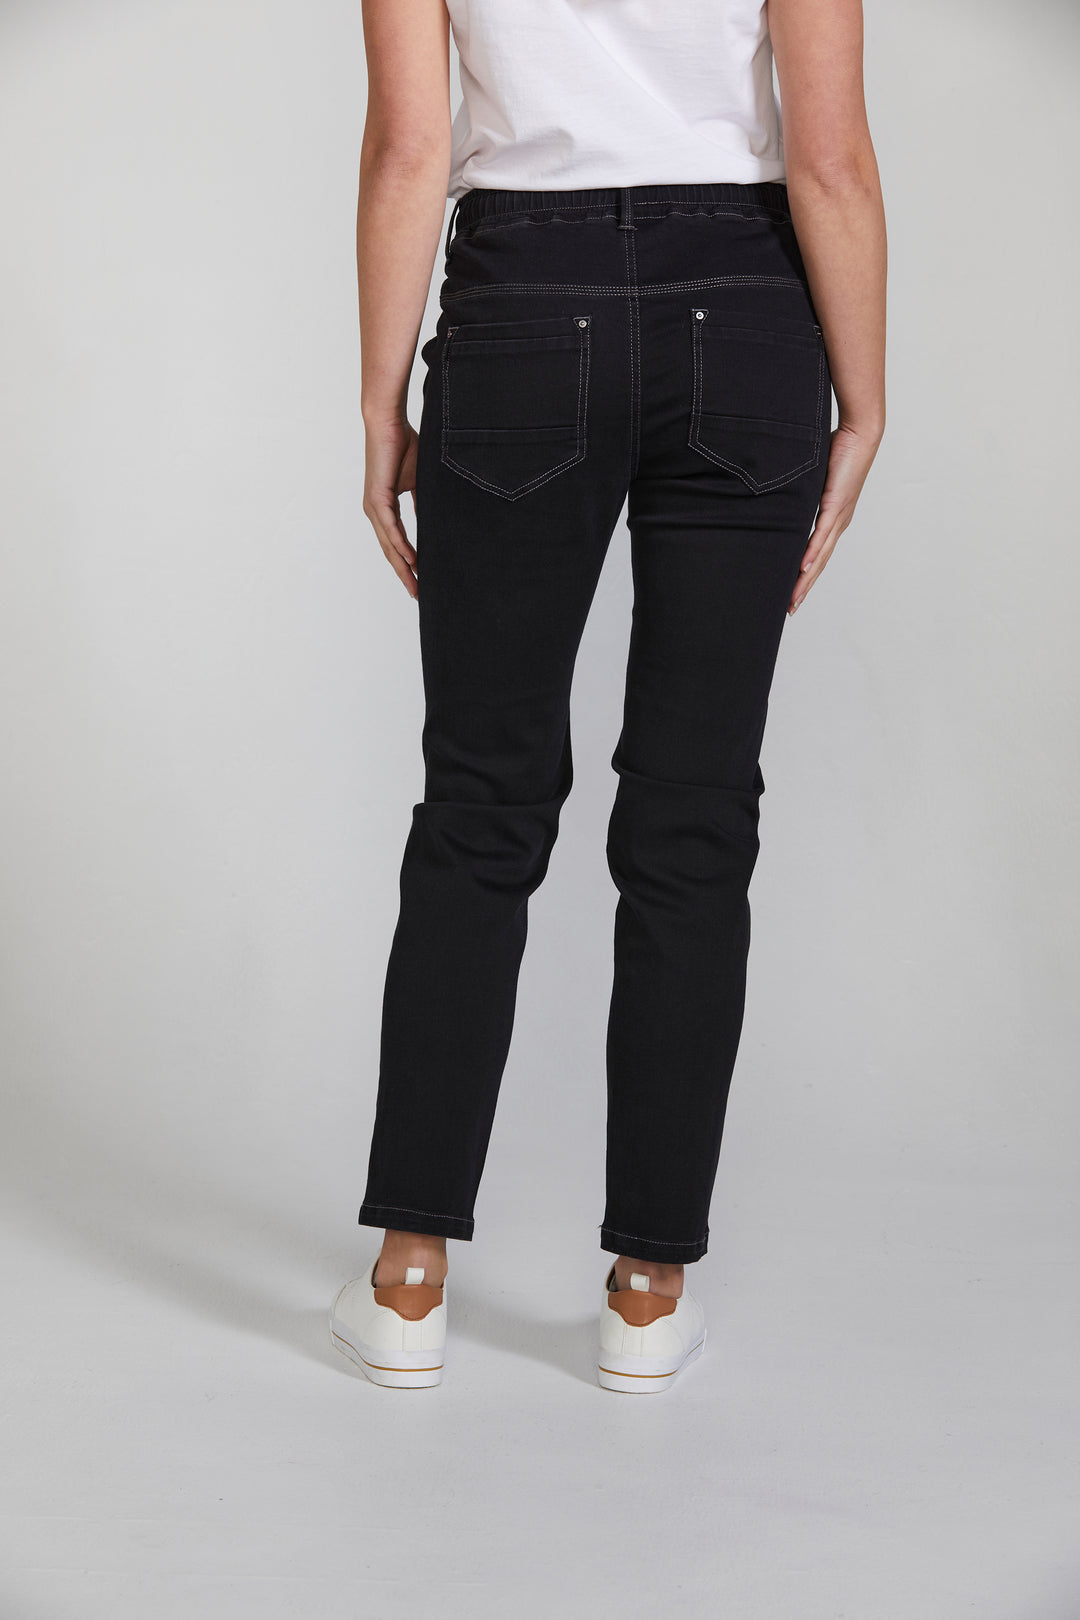 Lania Fort Jeans